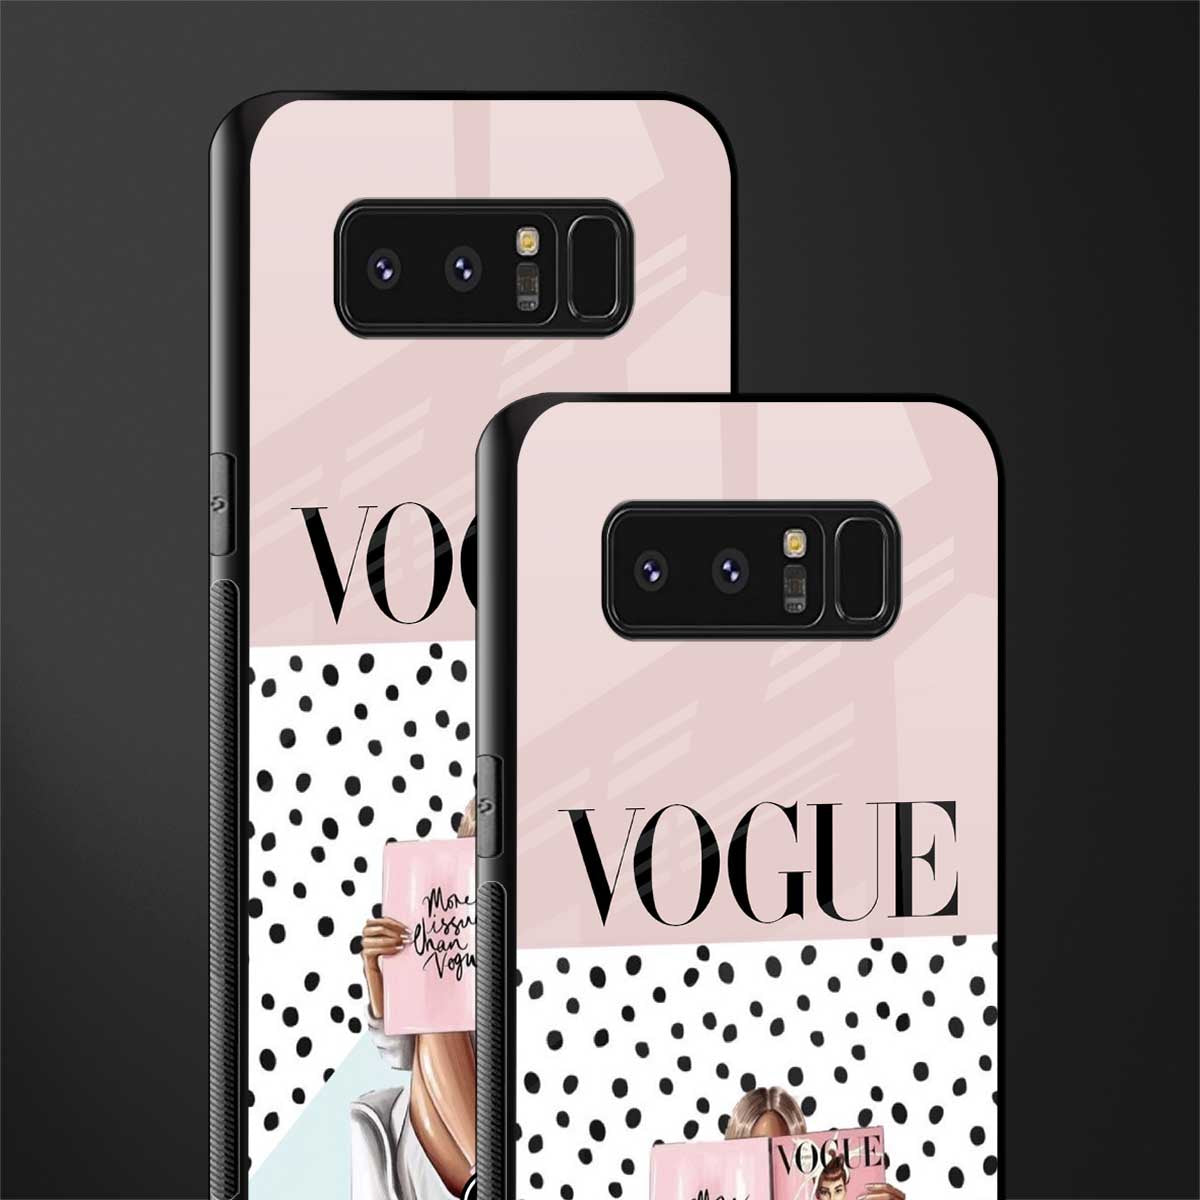 vogue queen glass case for samsung galaxy note 8 image-2